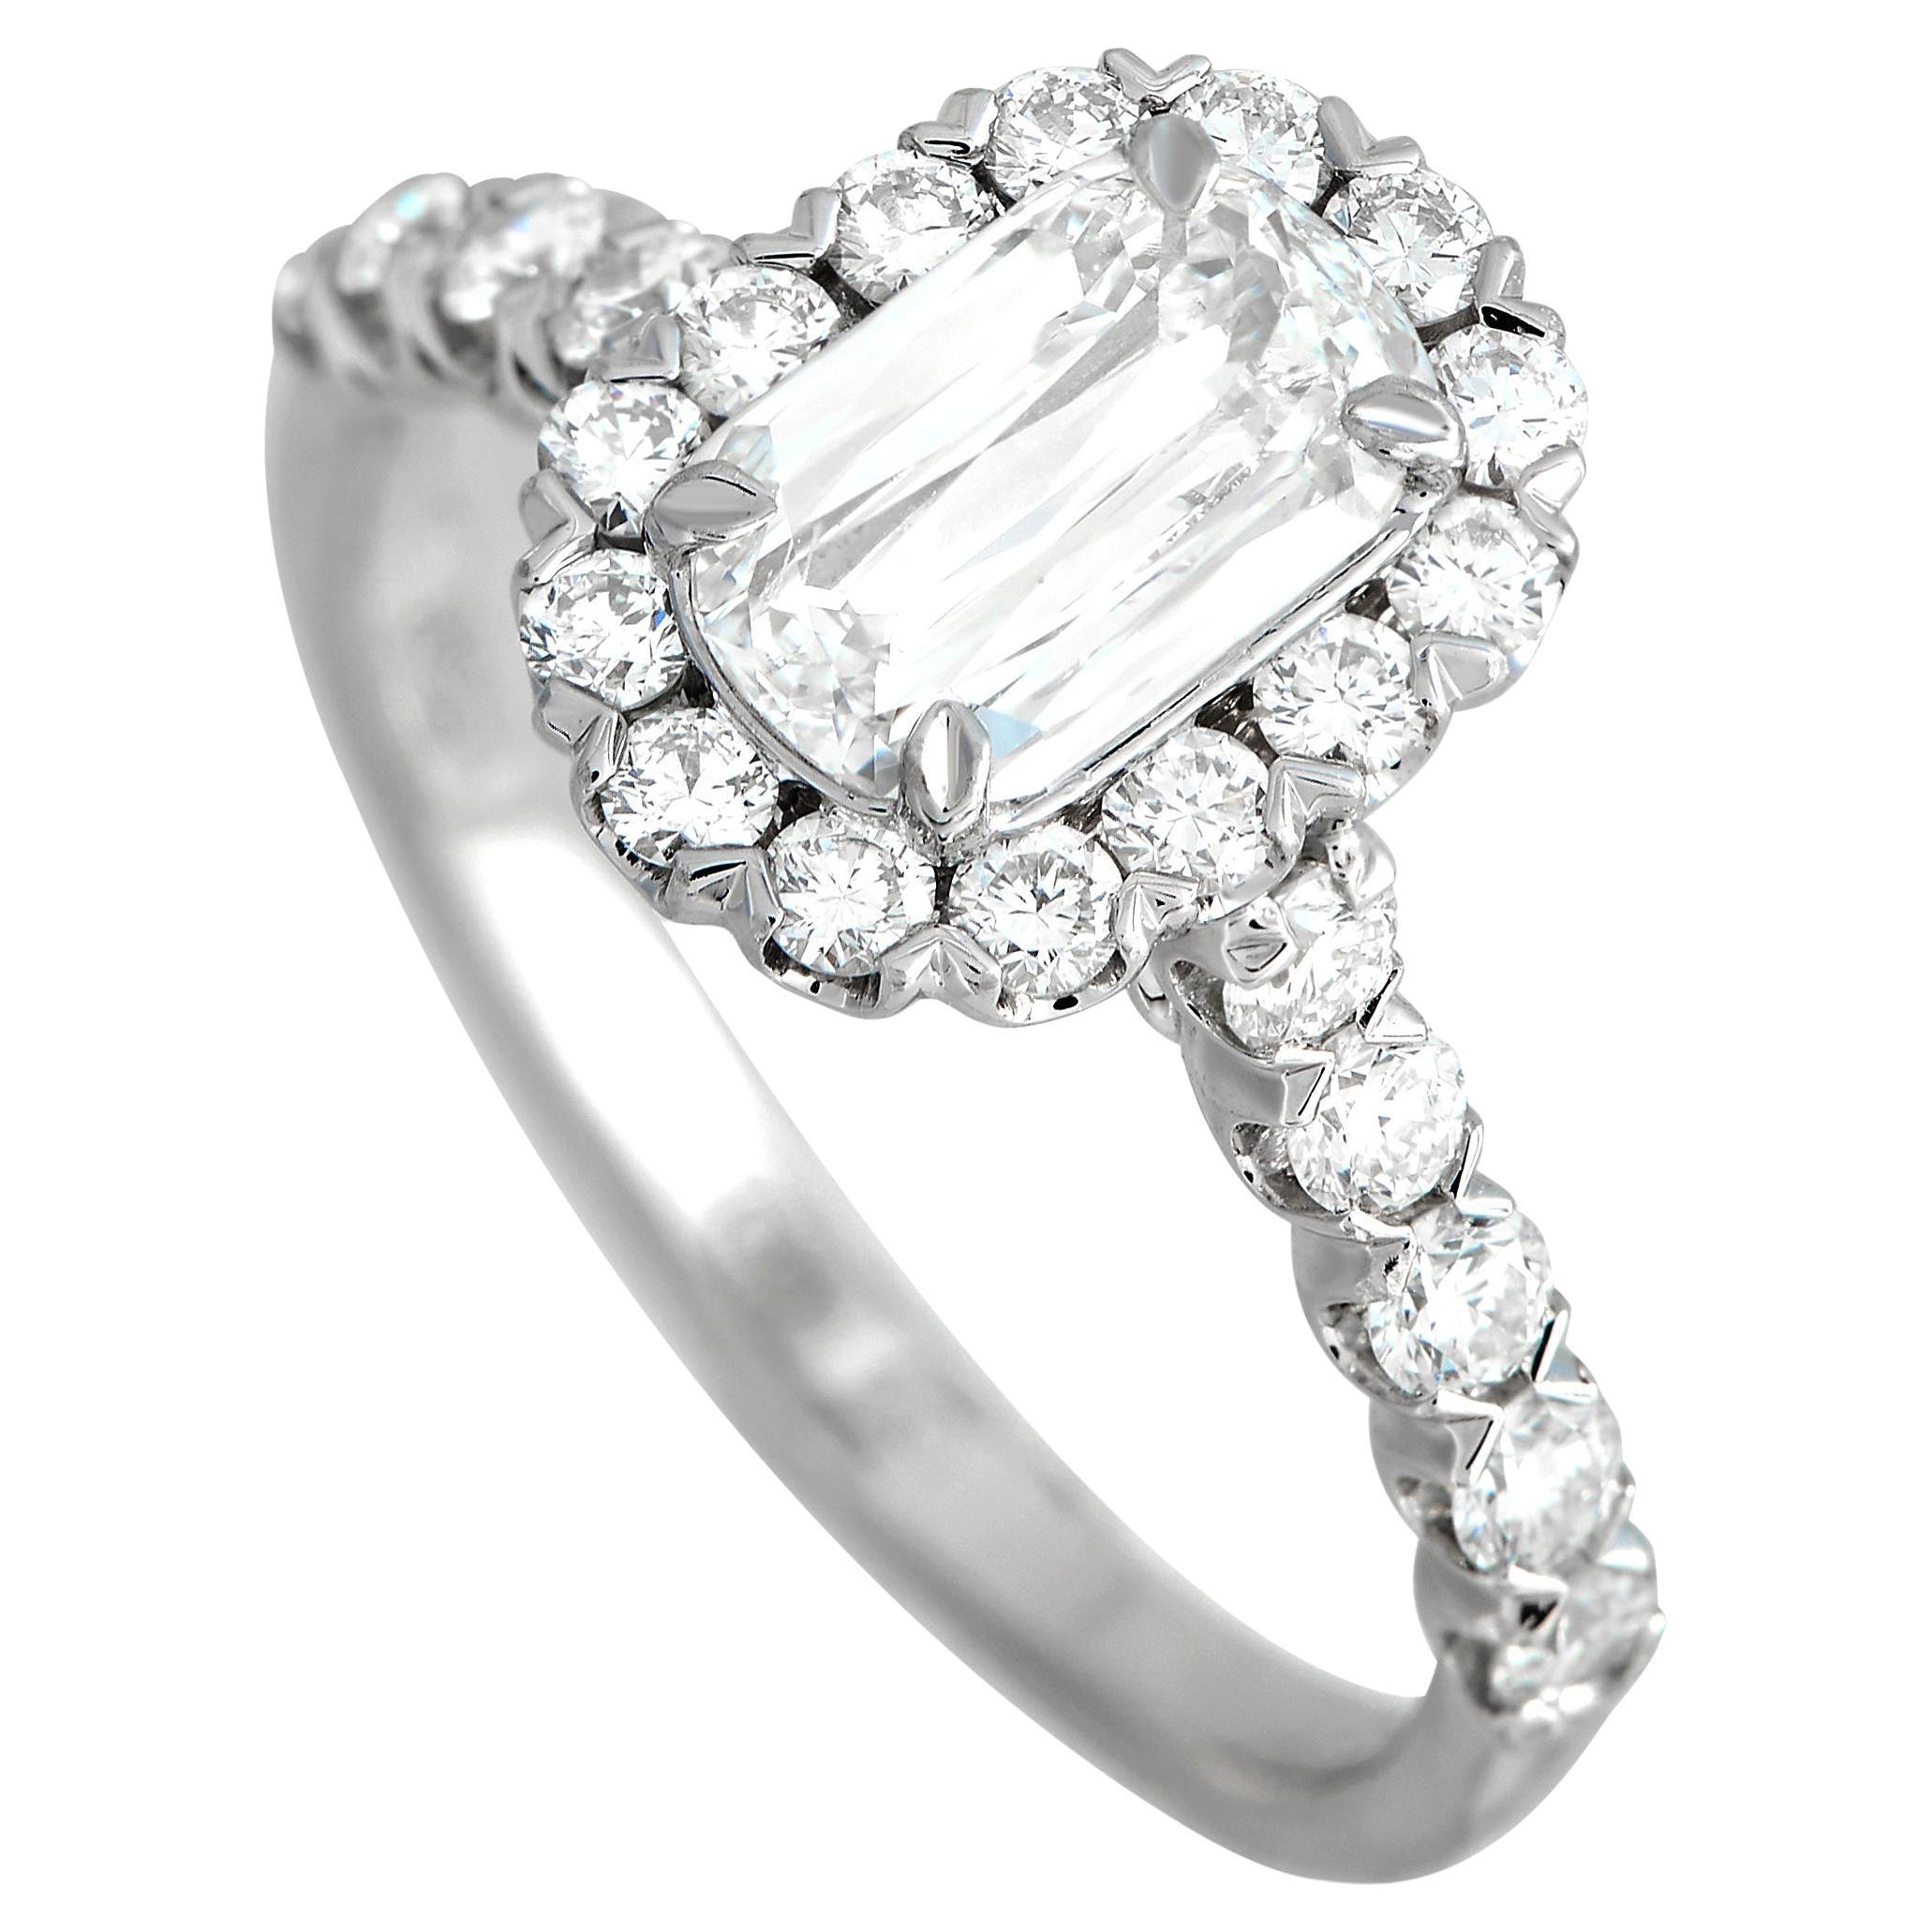 LB Exclusive Engagement Rings